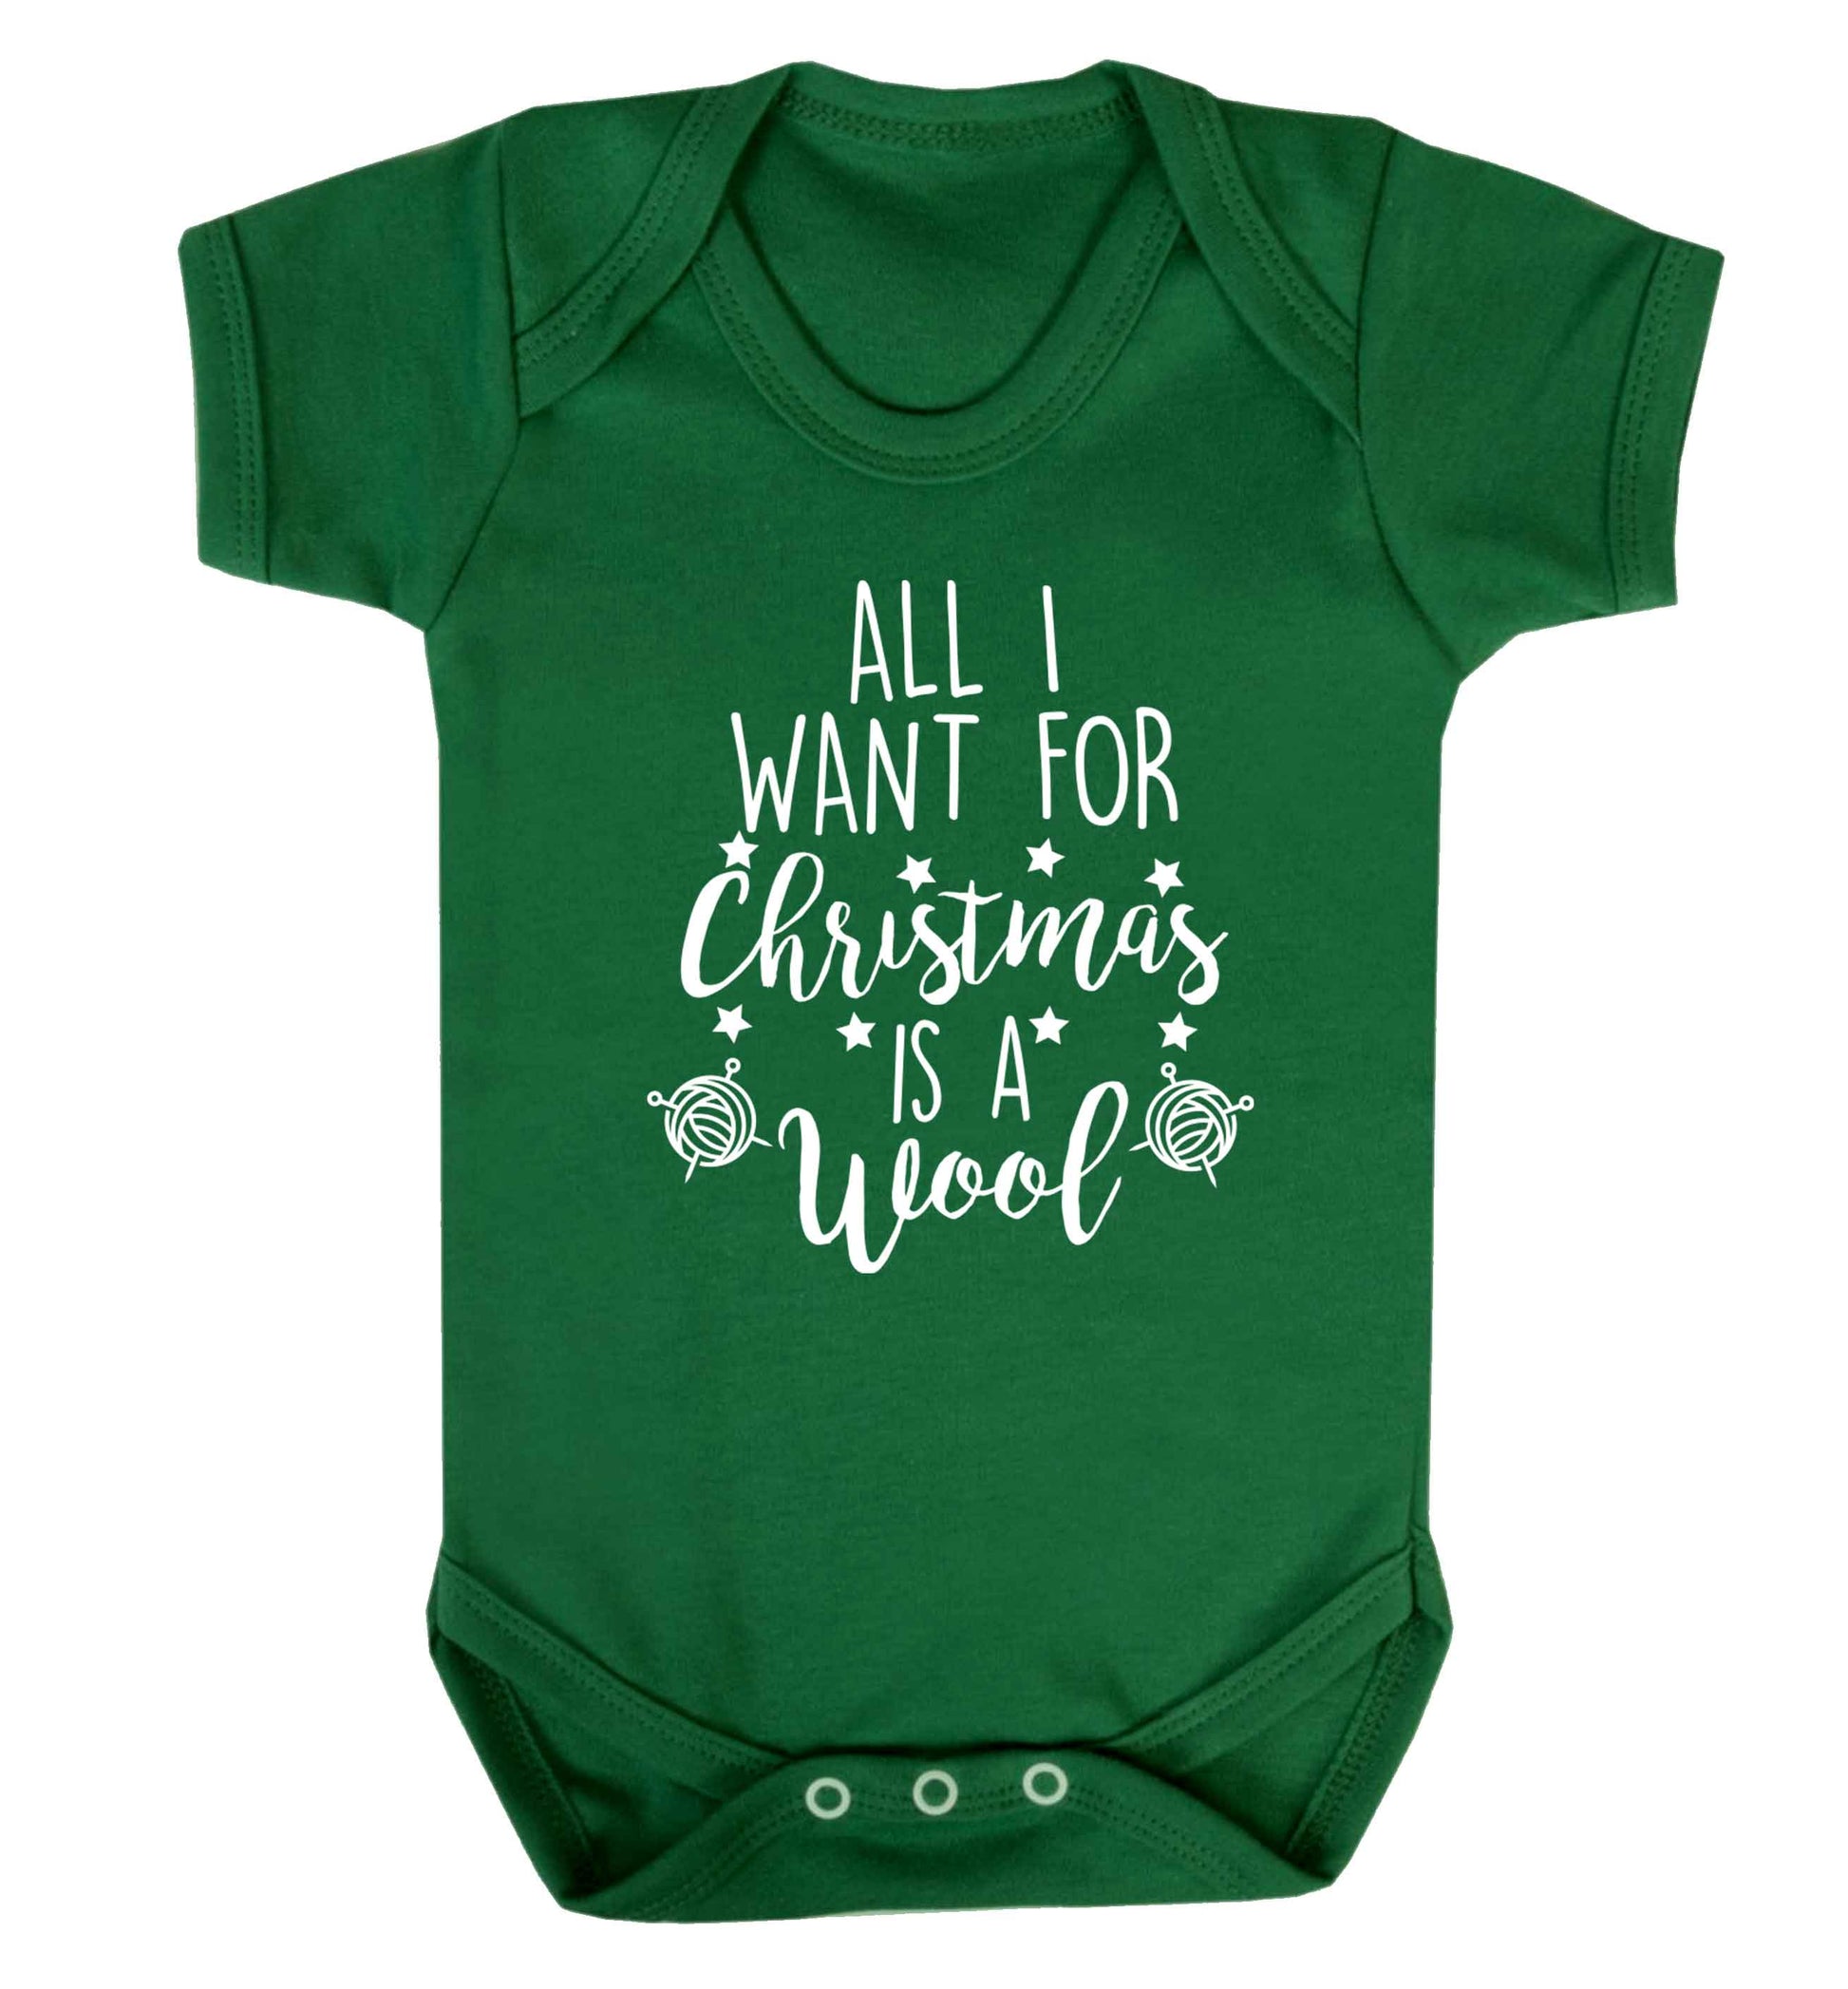 All I want for Christmas is wool! Baby Vest green 18-24 months